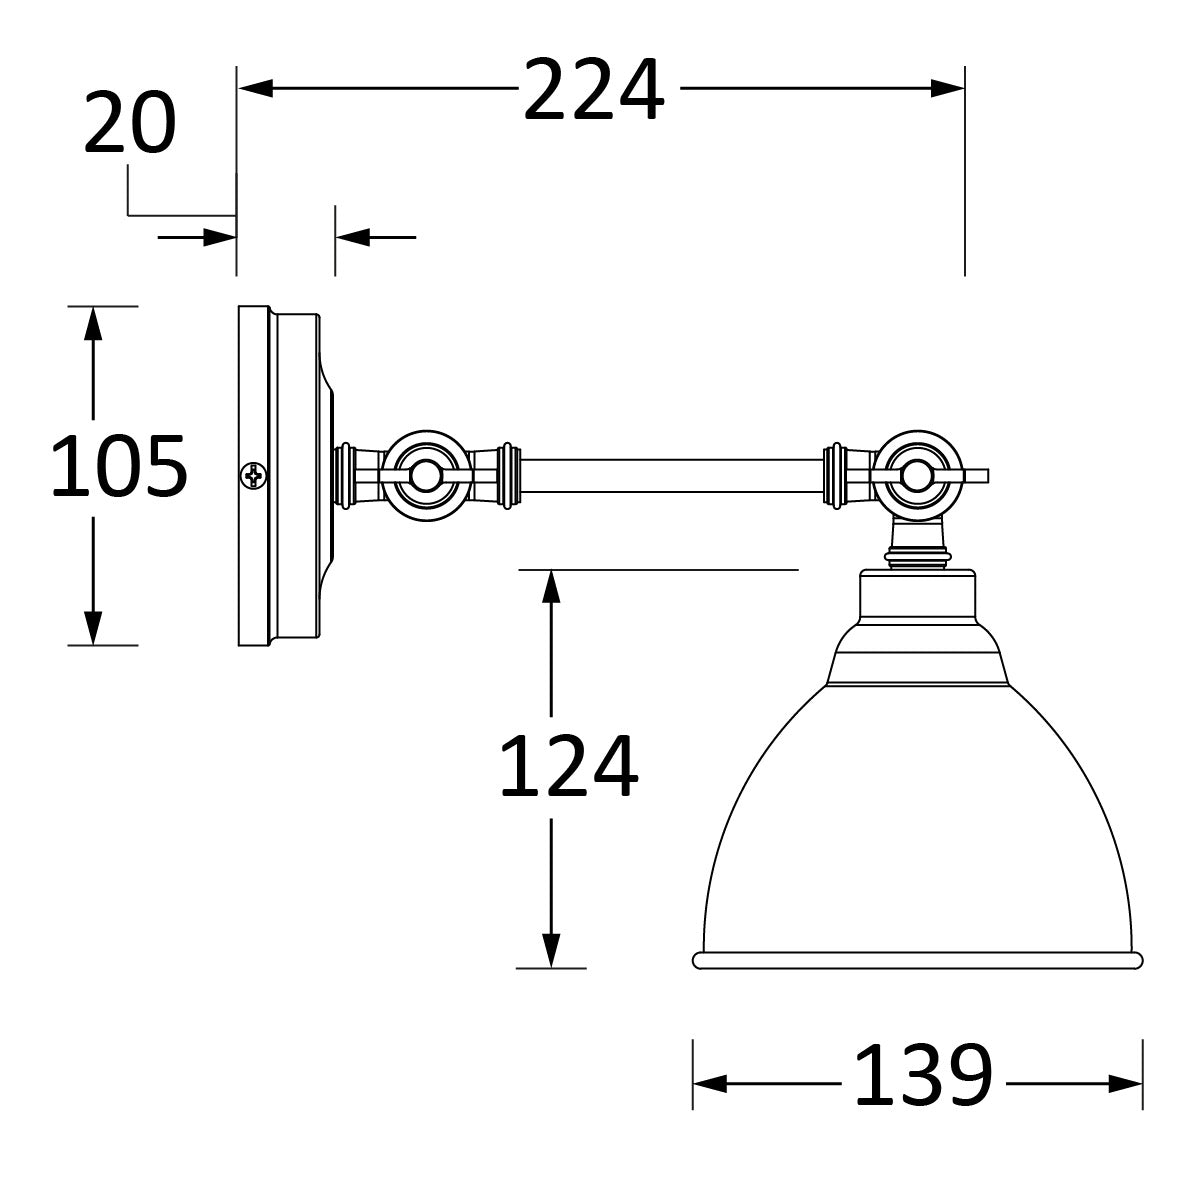 SHOW Technical Drawing of Brindley Wall Light in Upstream